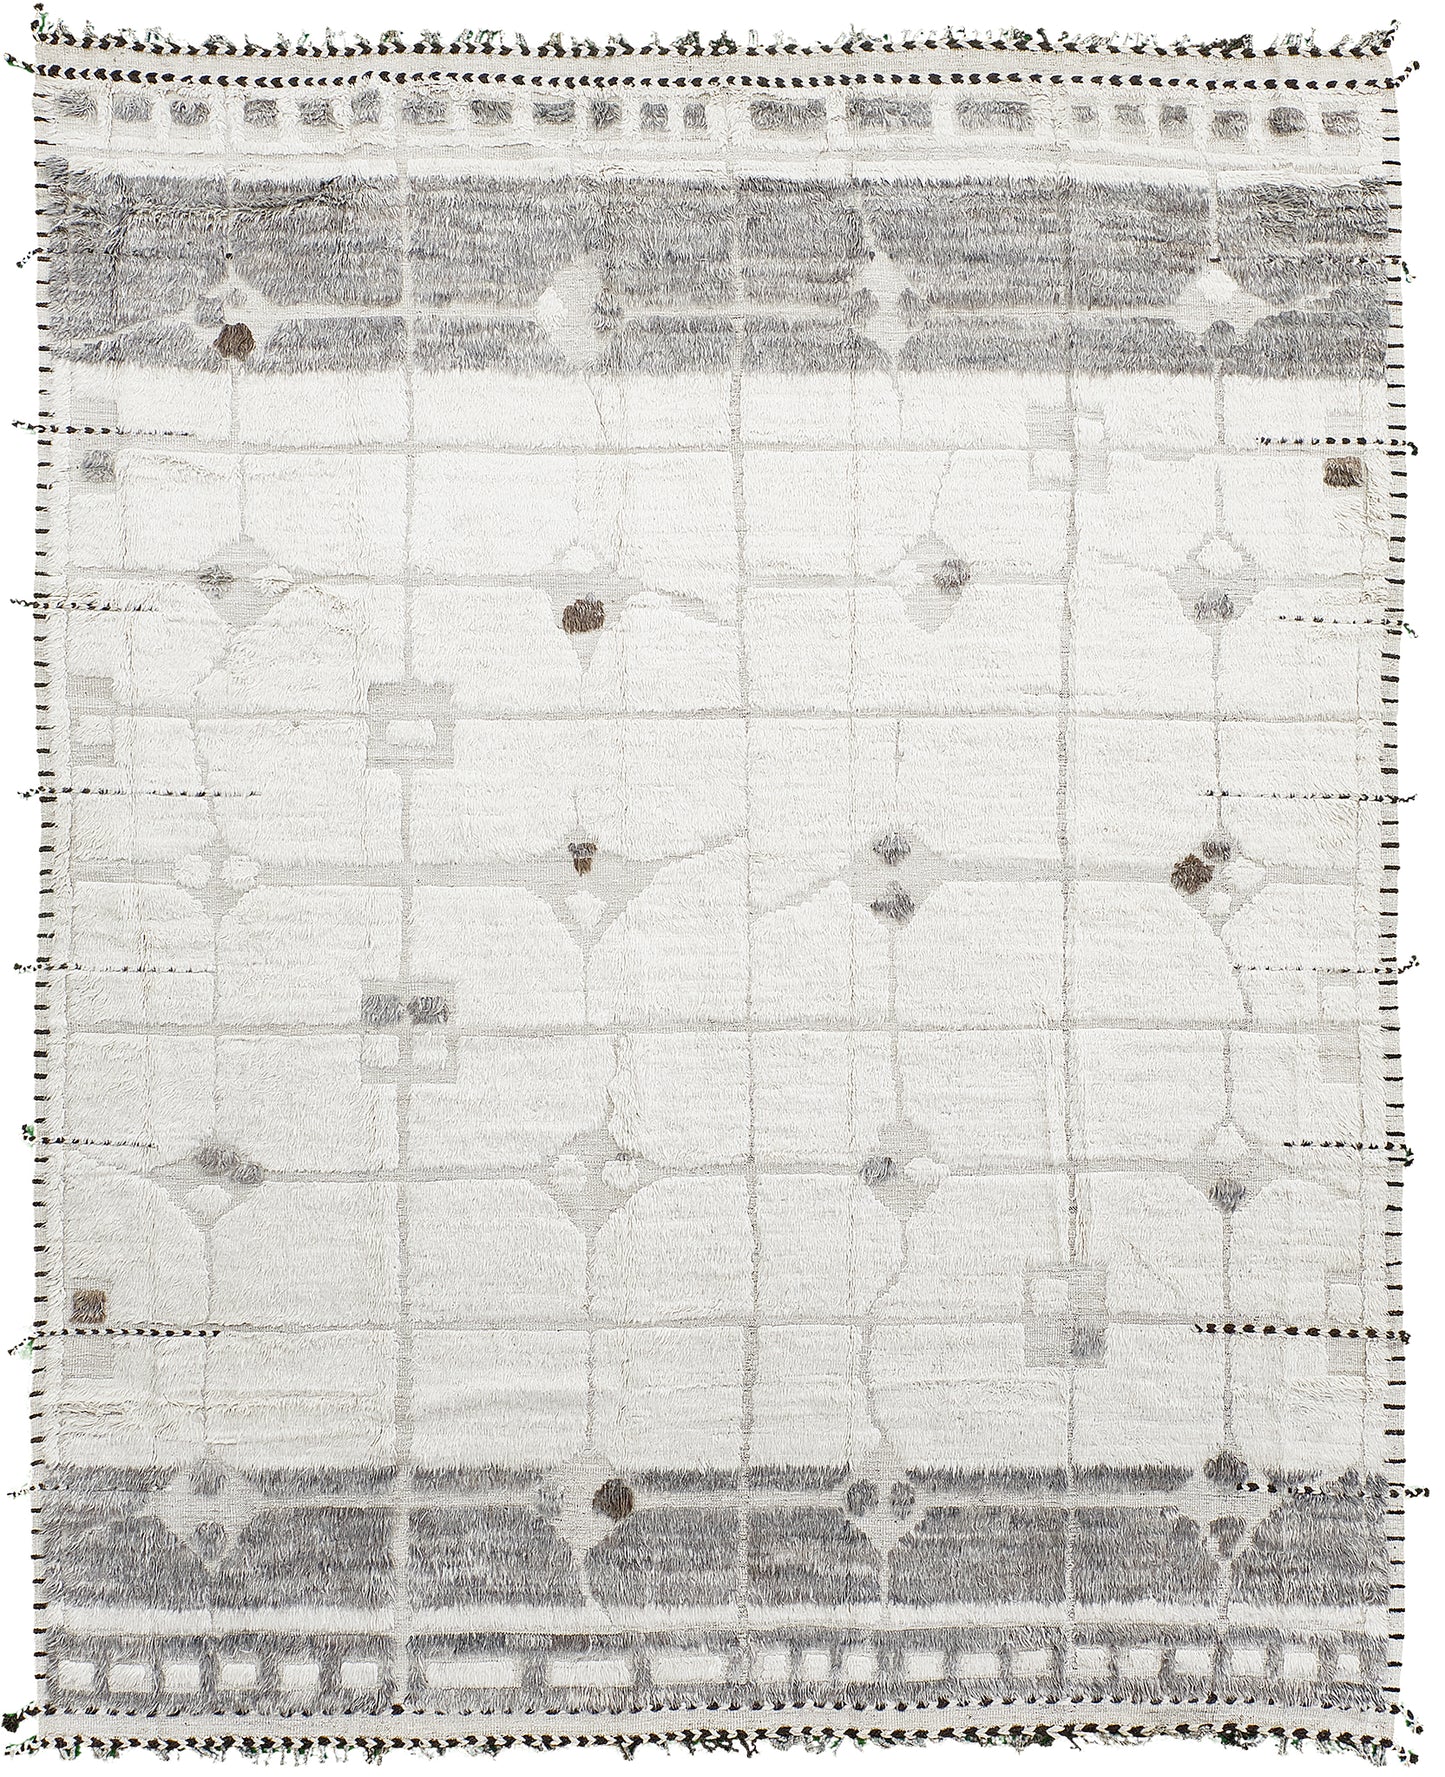 Modern Rug Image 9266 Pirouette, Kust Collection